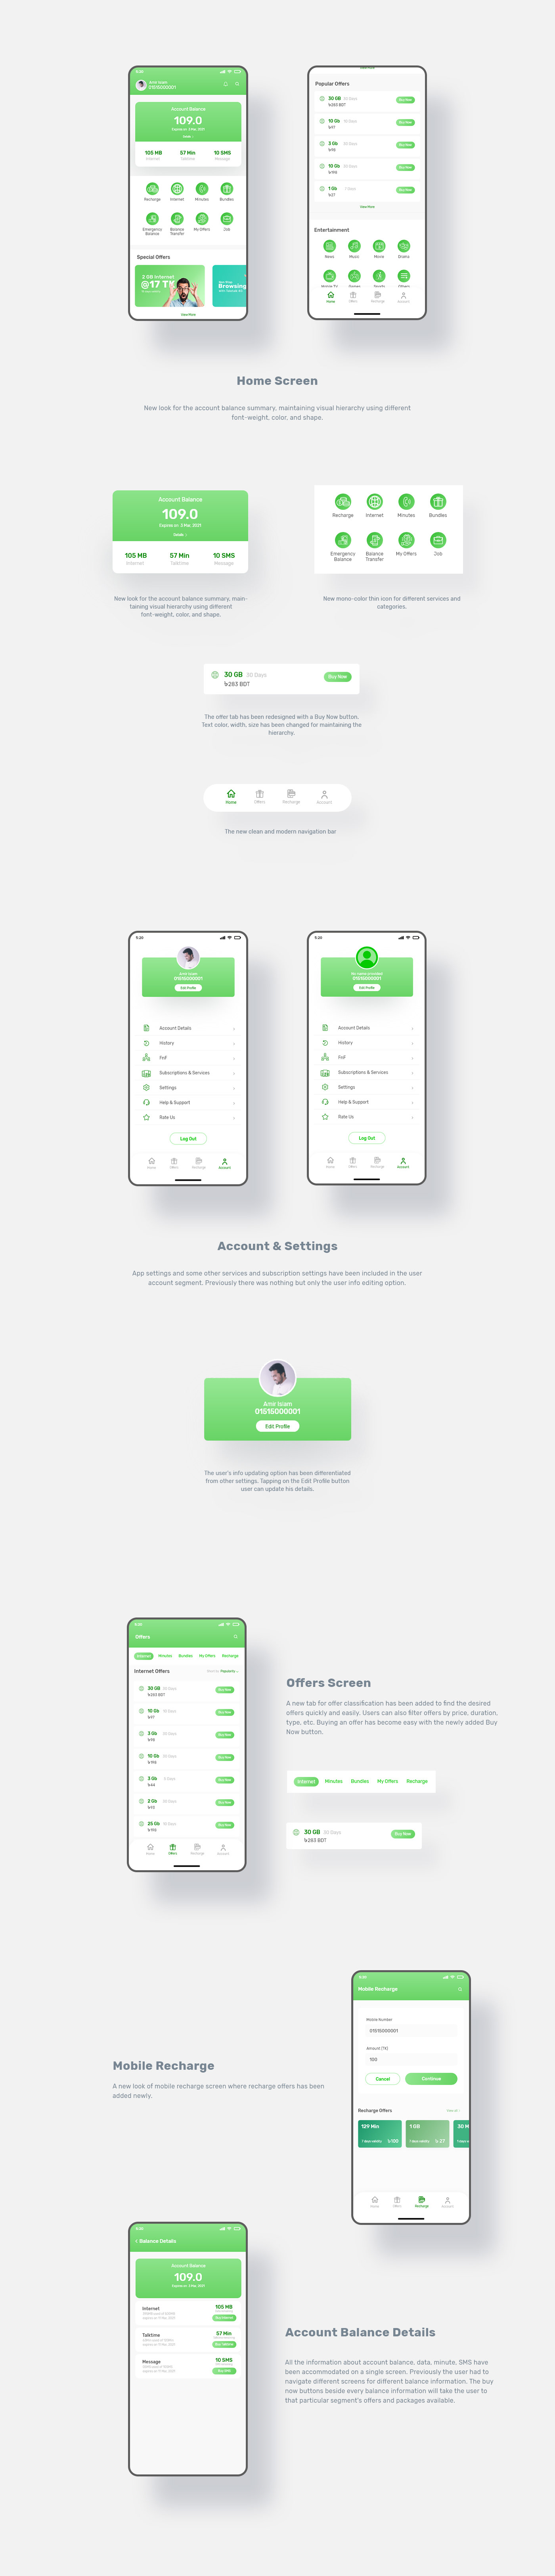 case study of my teletalk app redesign. Total ui and some ux redesign.